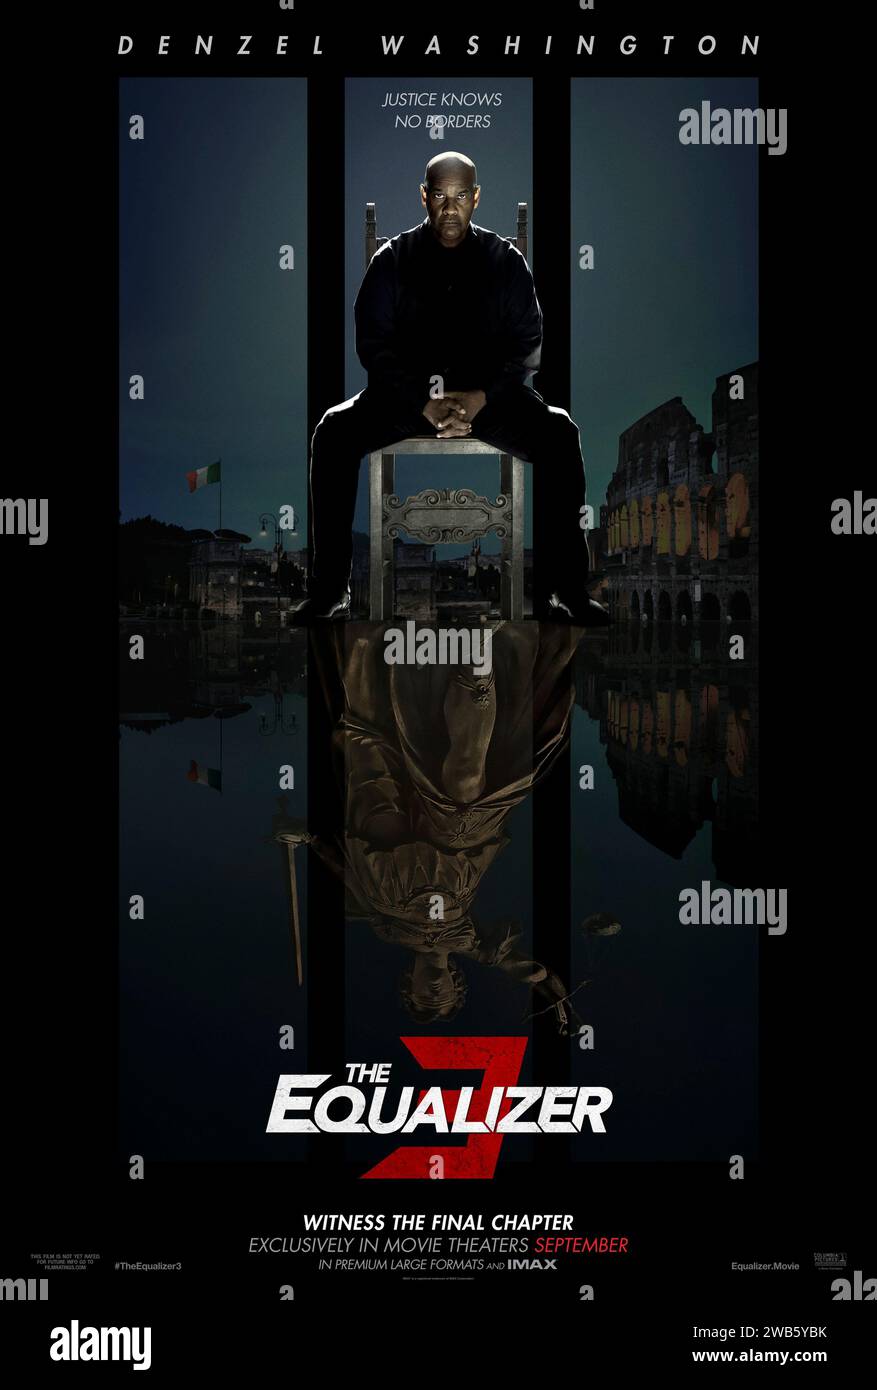 The Equalizer 3 (2023) directed by Antoine Fuqua and starring Denzel Washington, Dakota Fanning and Eugenio Mastrandrea. Robert McCall finds himself at home in Southern Italy but he discovers his friends are under the control of local crime bosses. As events turn deadly, McCall knows what he has to do: become his friends' protector by taking on the mafia. US one sheet poster ***EDITORIAL USE ONLY***. Credit: BFA / Columbia Pictures Stock Photo